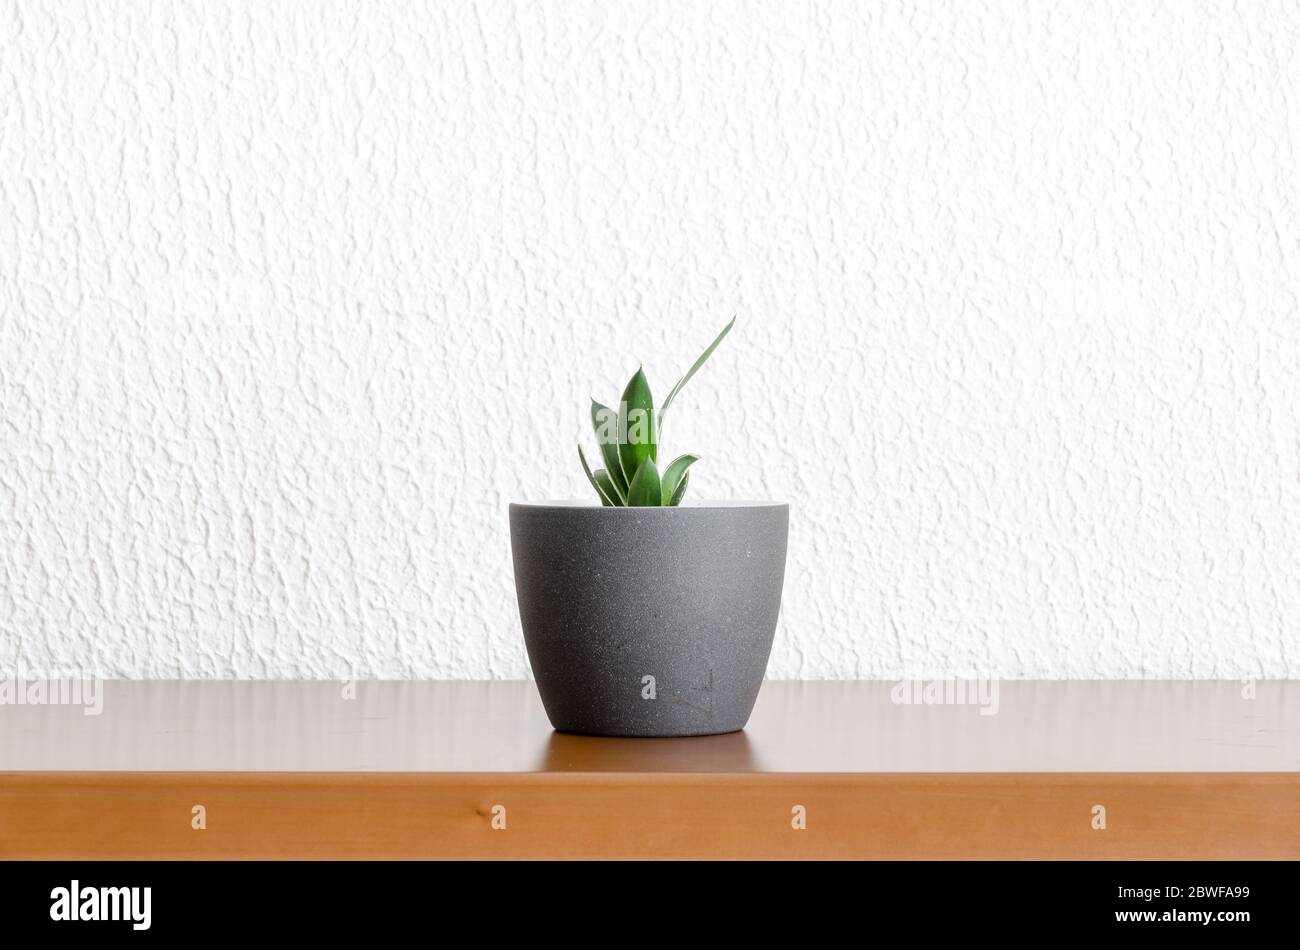 Simple and minimalistic still life with green plant in a plant pot or flowerpot on a wooden desk or table, interior decoration, indoors, front view Stock Photo